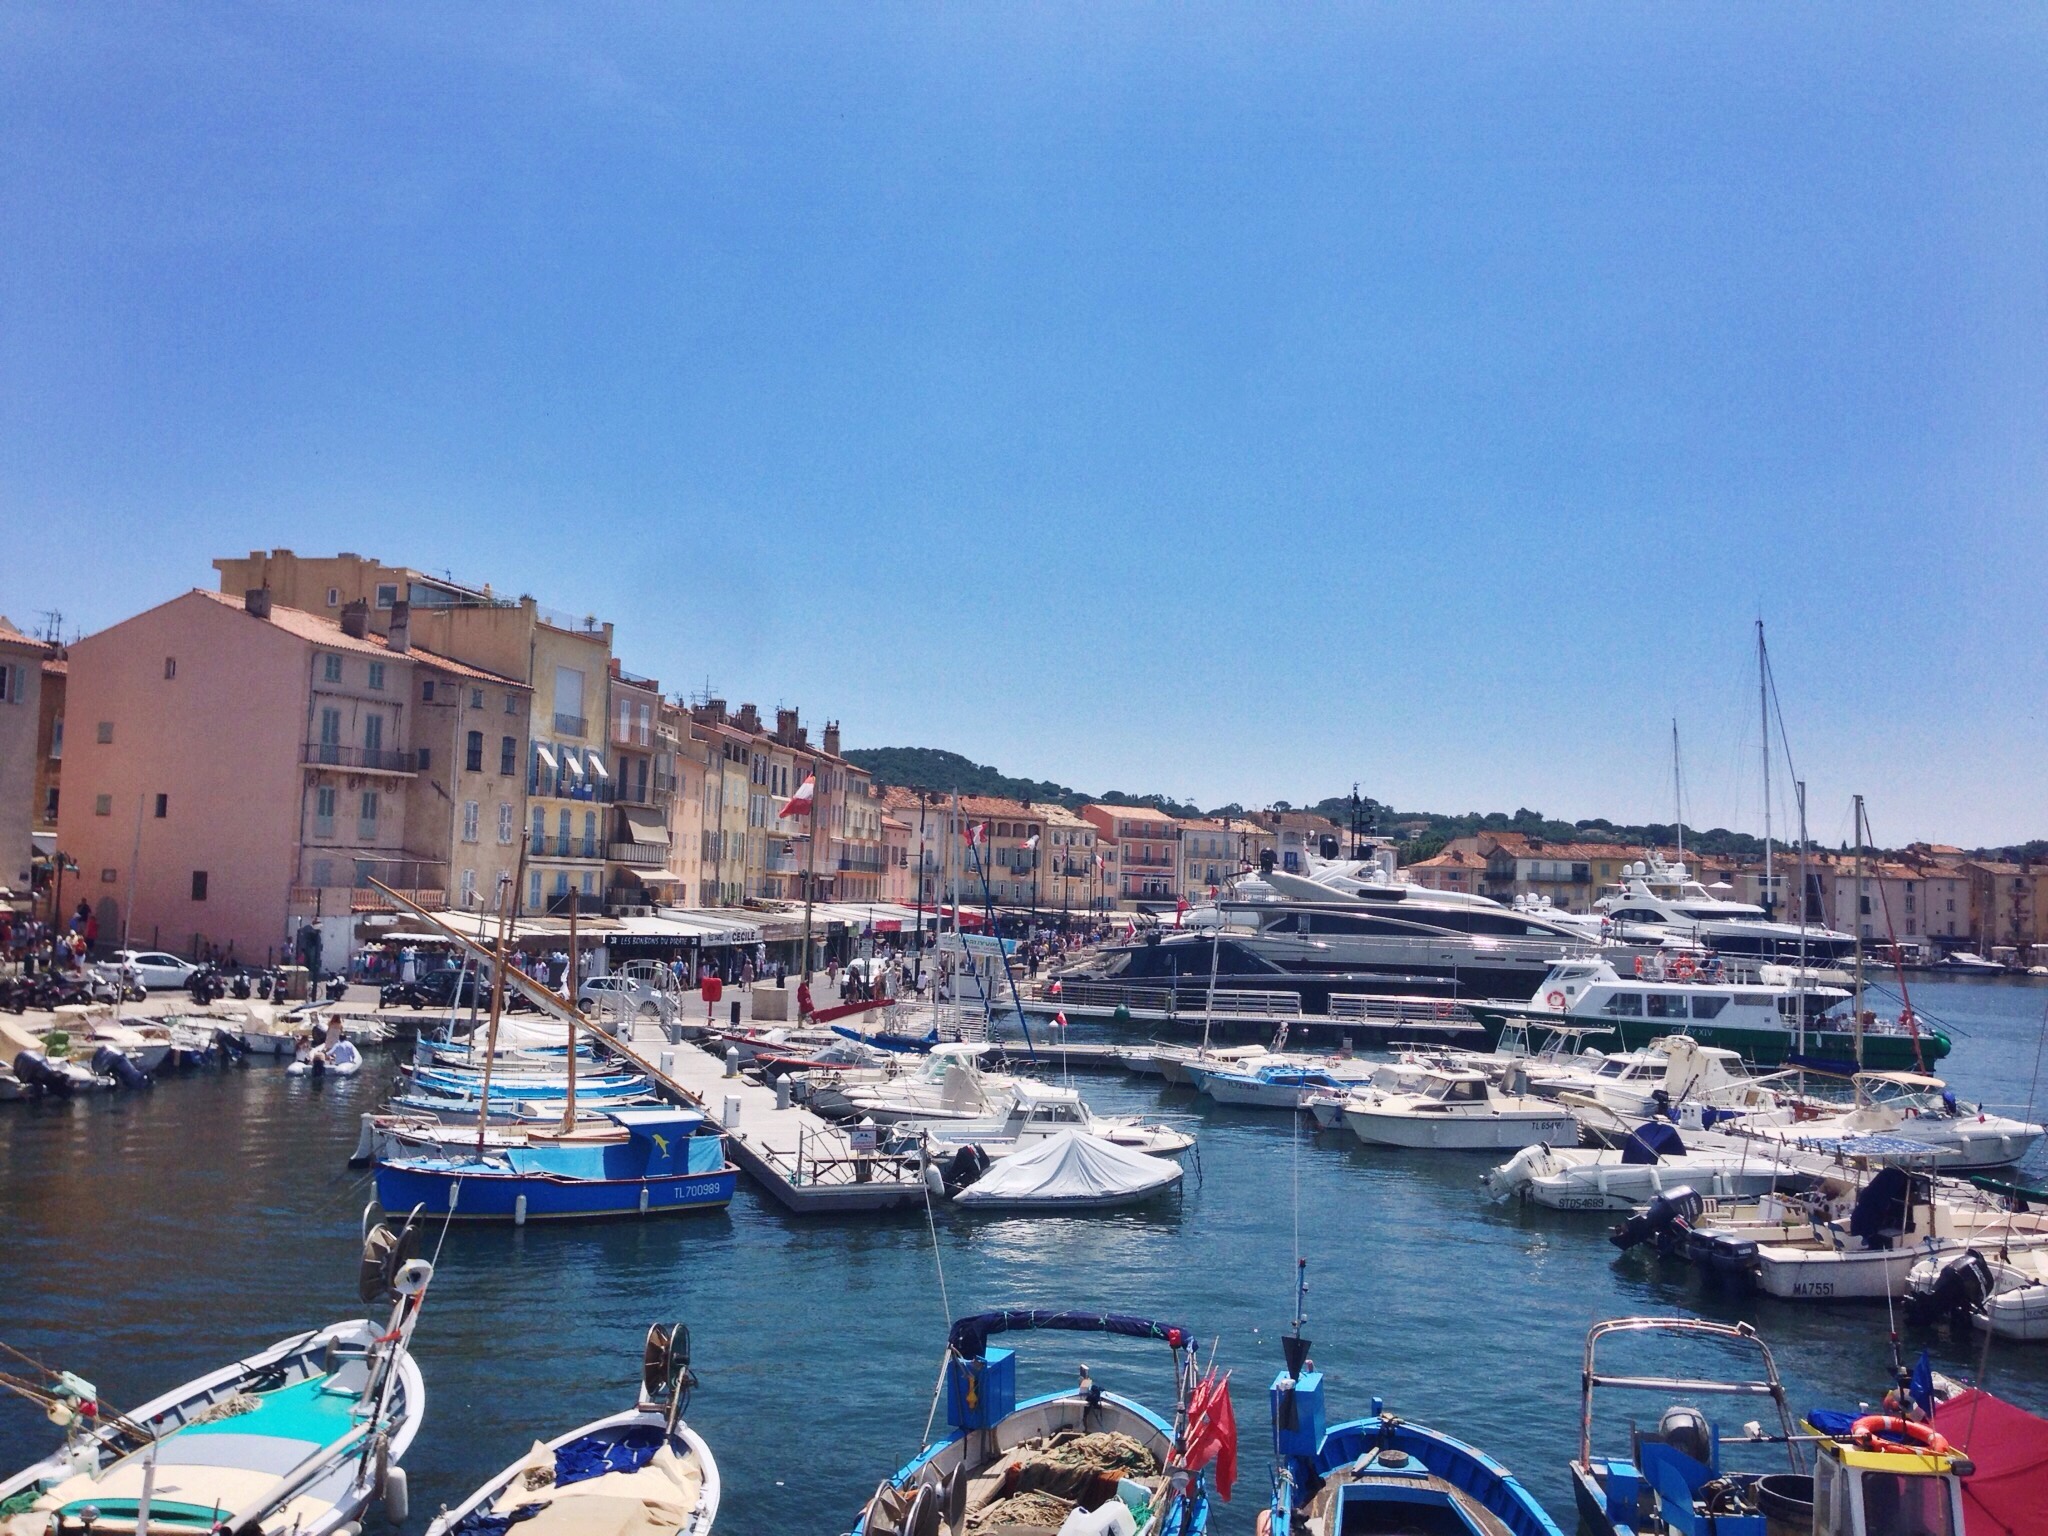 The port of St. Tropez - Côte d'Azur - South of France (French Riviera)